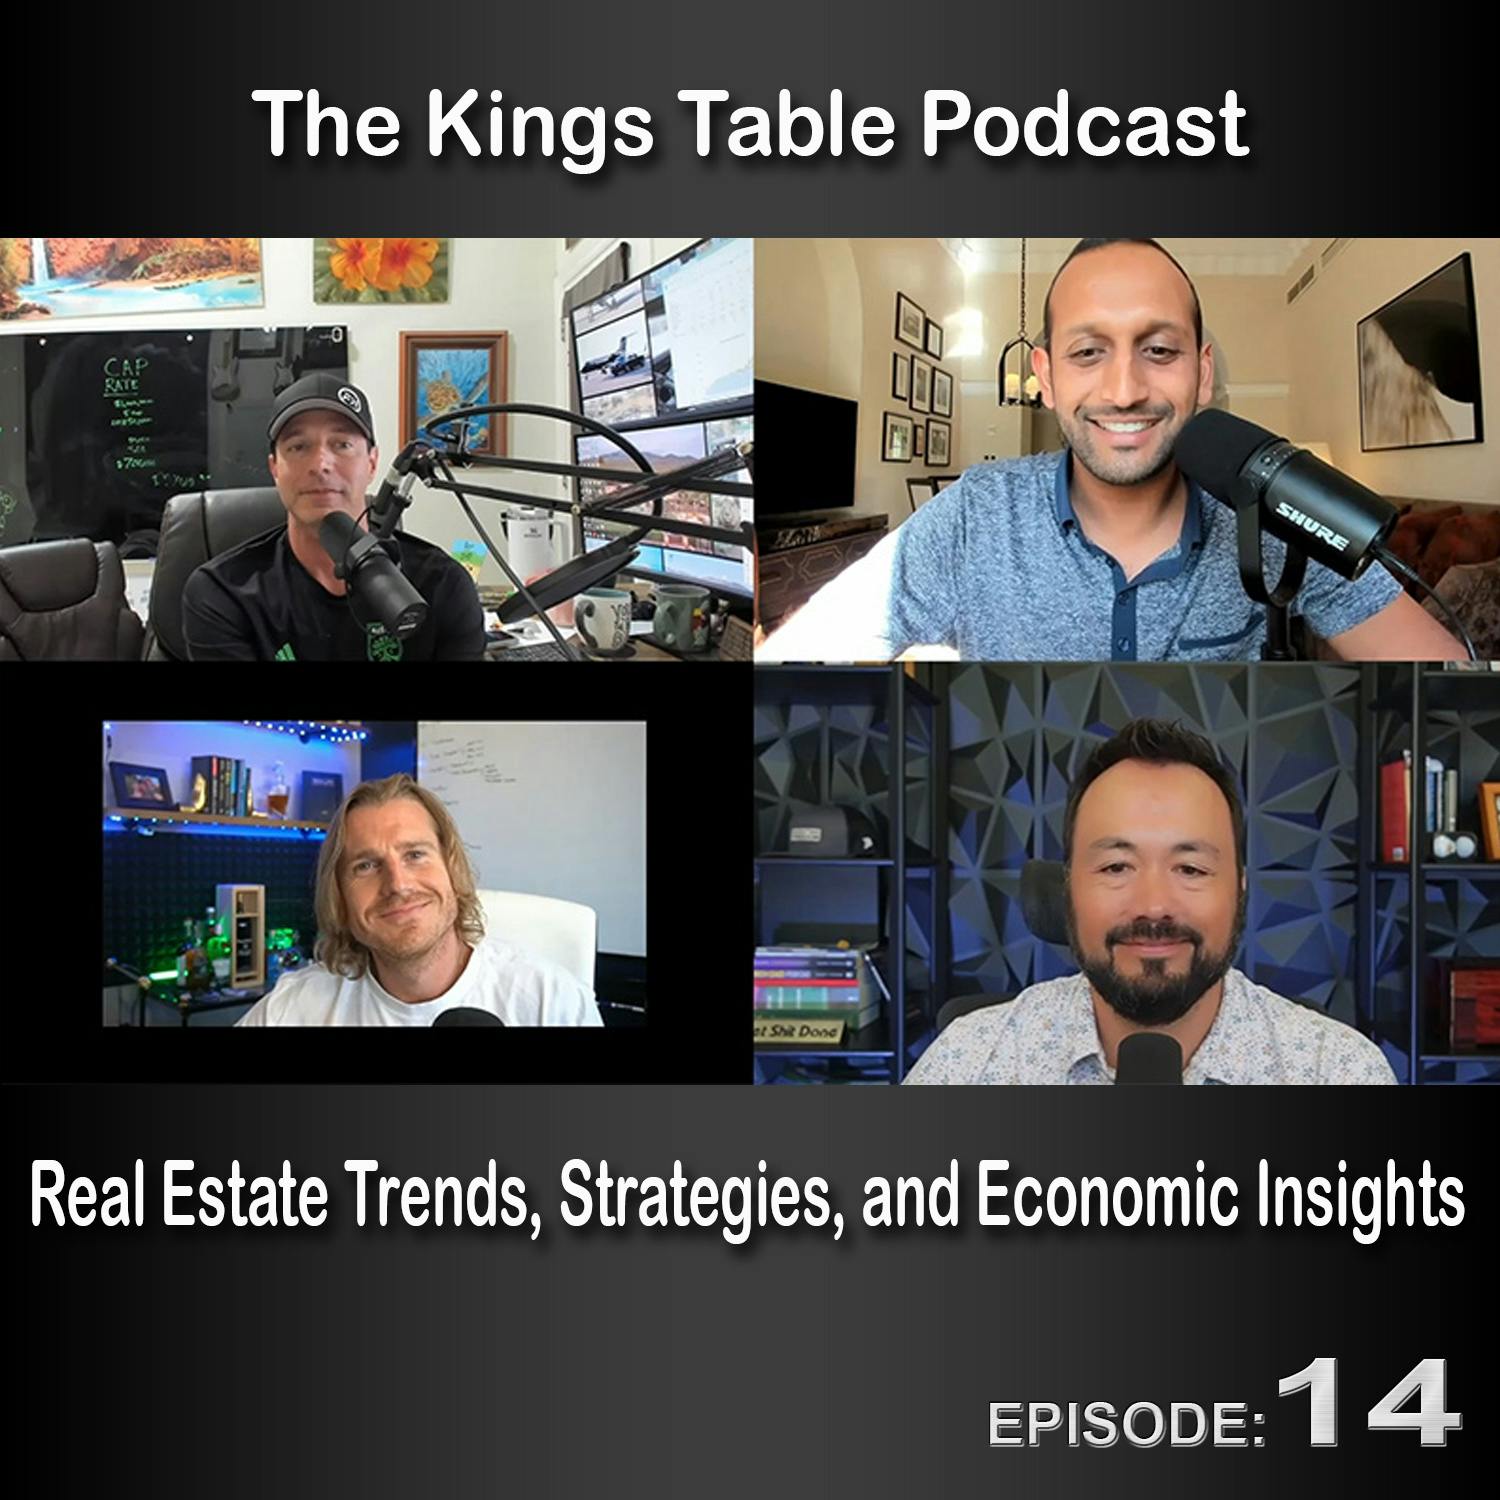 The Kings Table Episode 14 - Real Estate Trends, Strategies, and Economic Insights